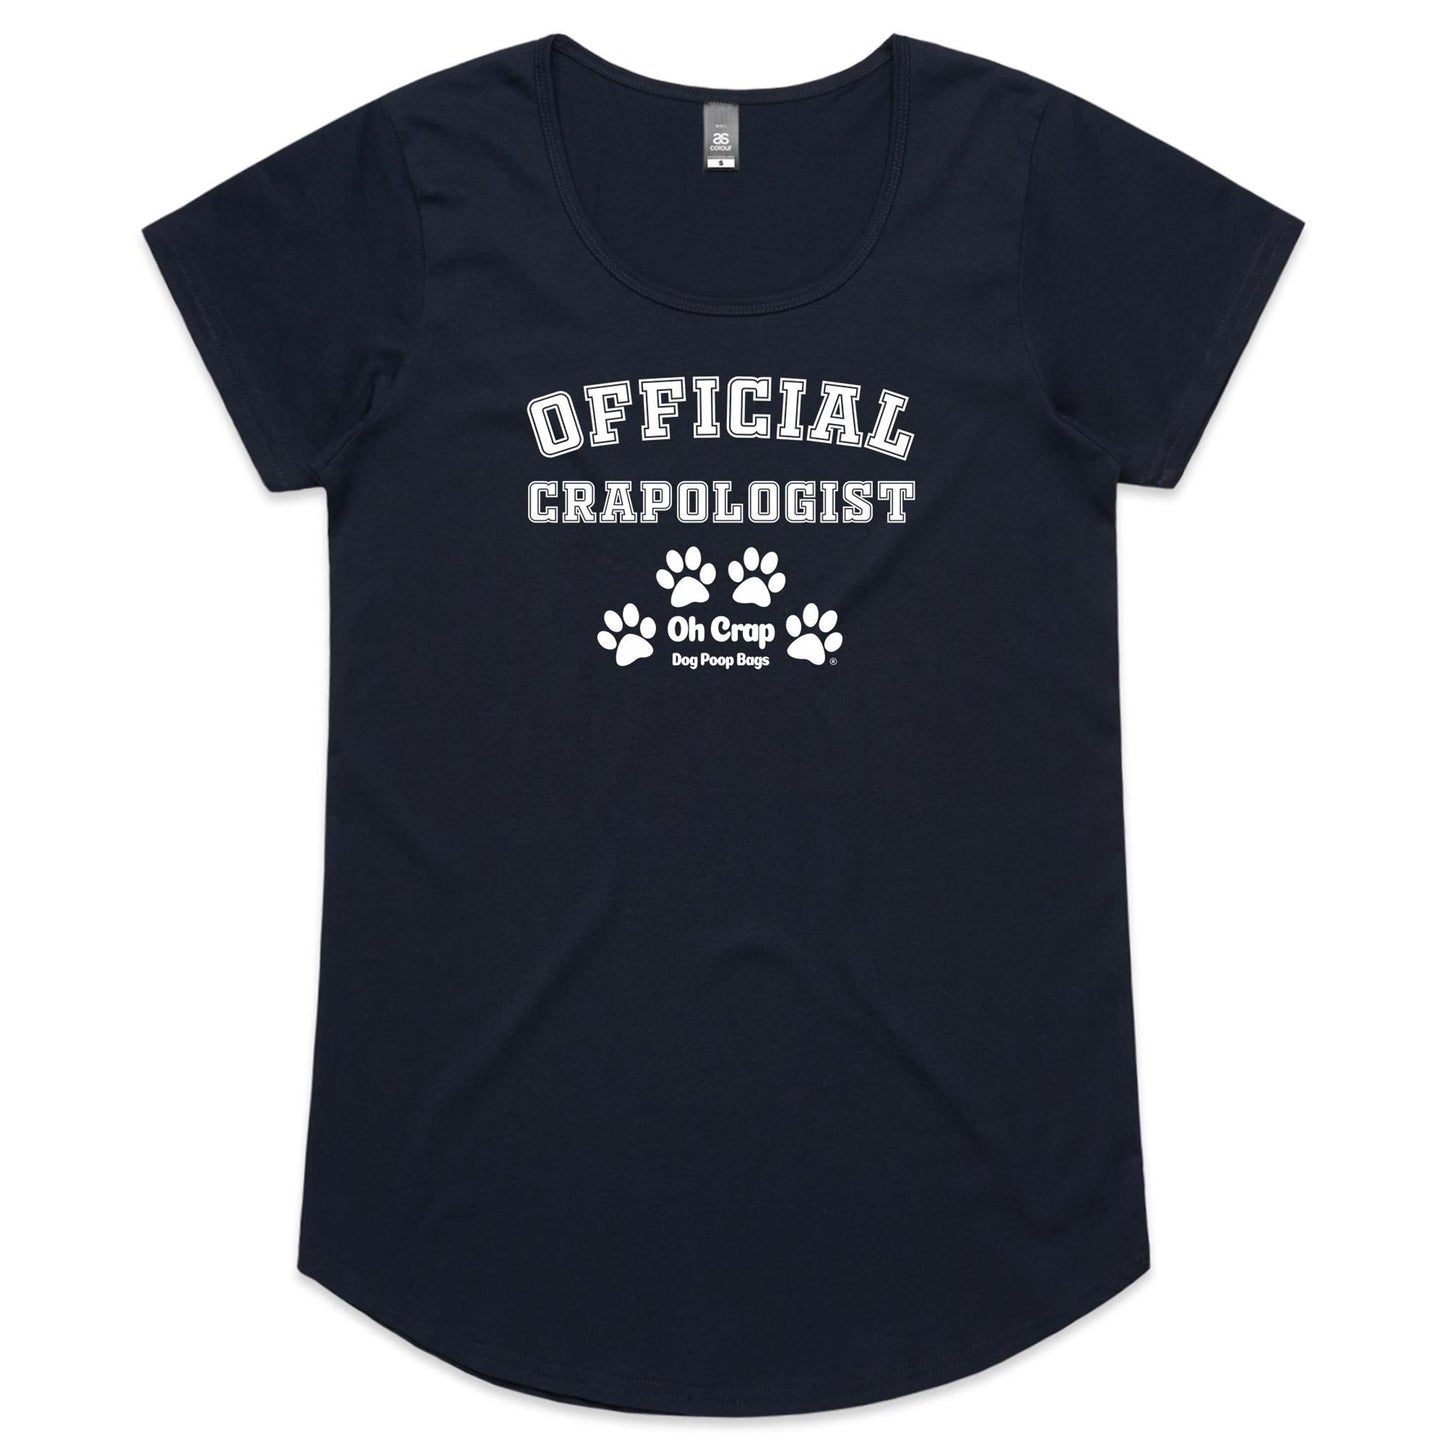 Official Crapologist Women's Scoop T-Shirt: Wear The Change!